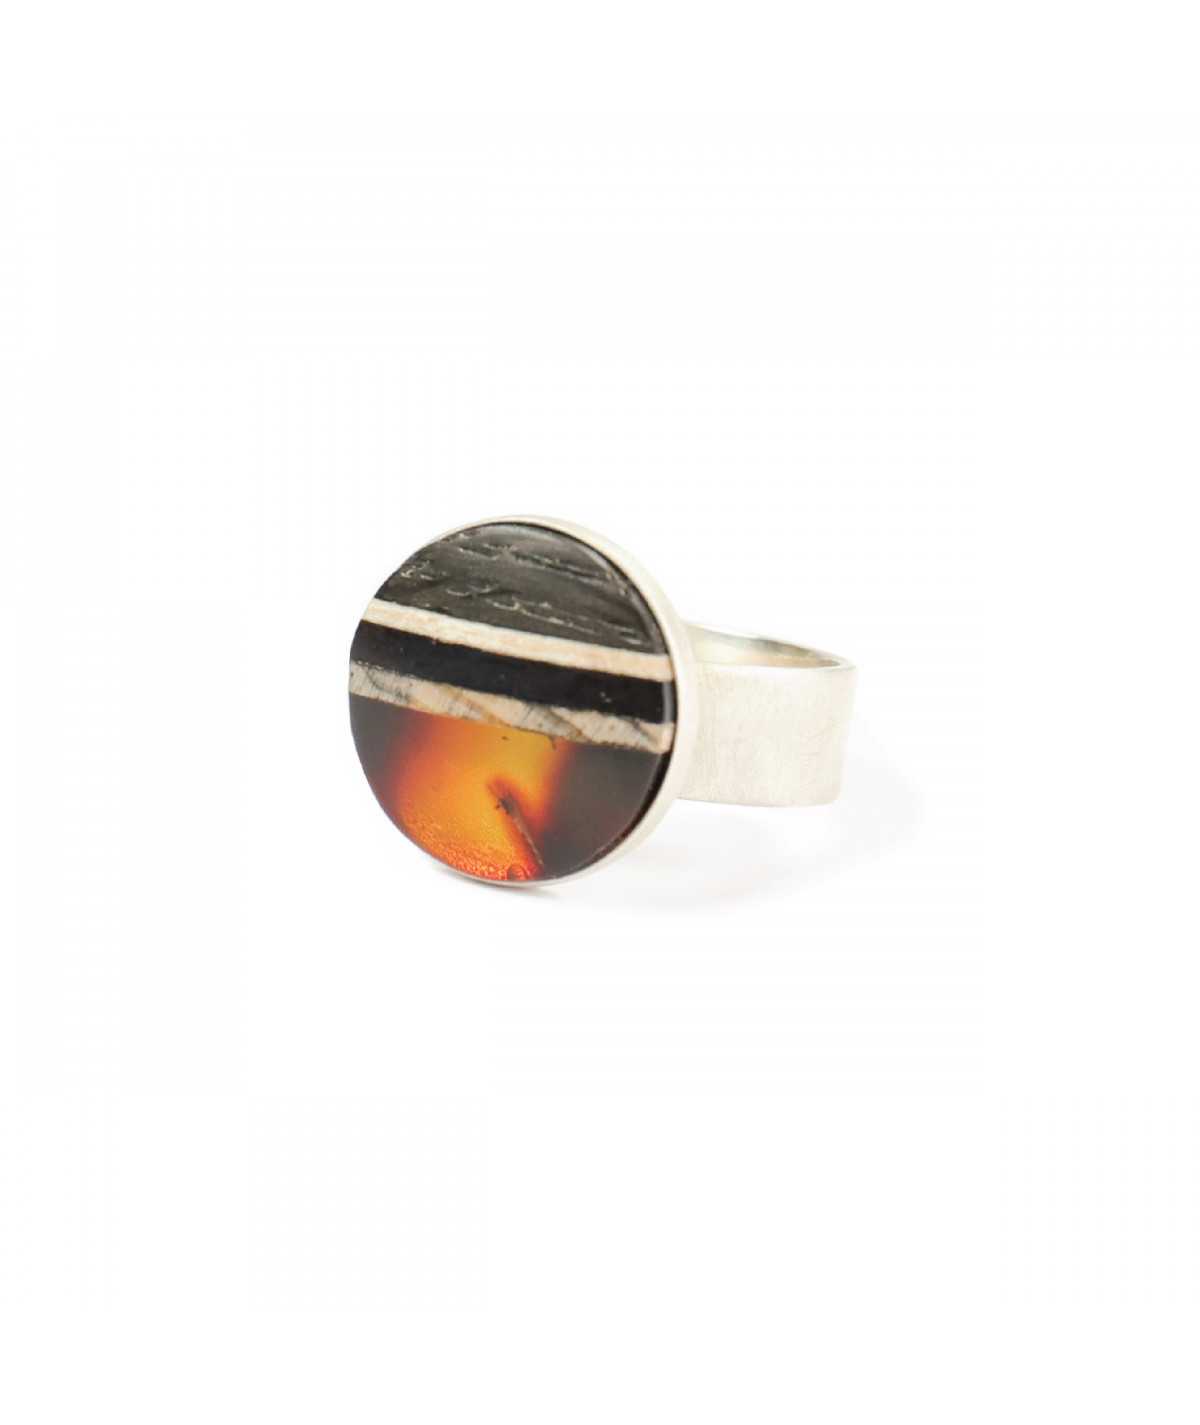 Sunset ring inspired by sunset with bog oak and red amber.